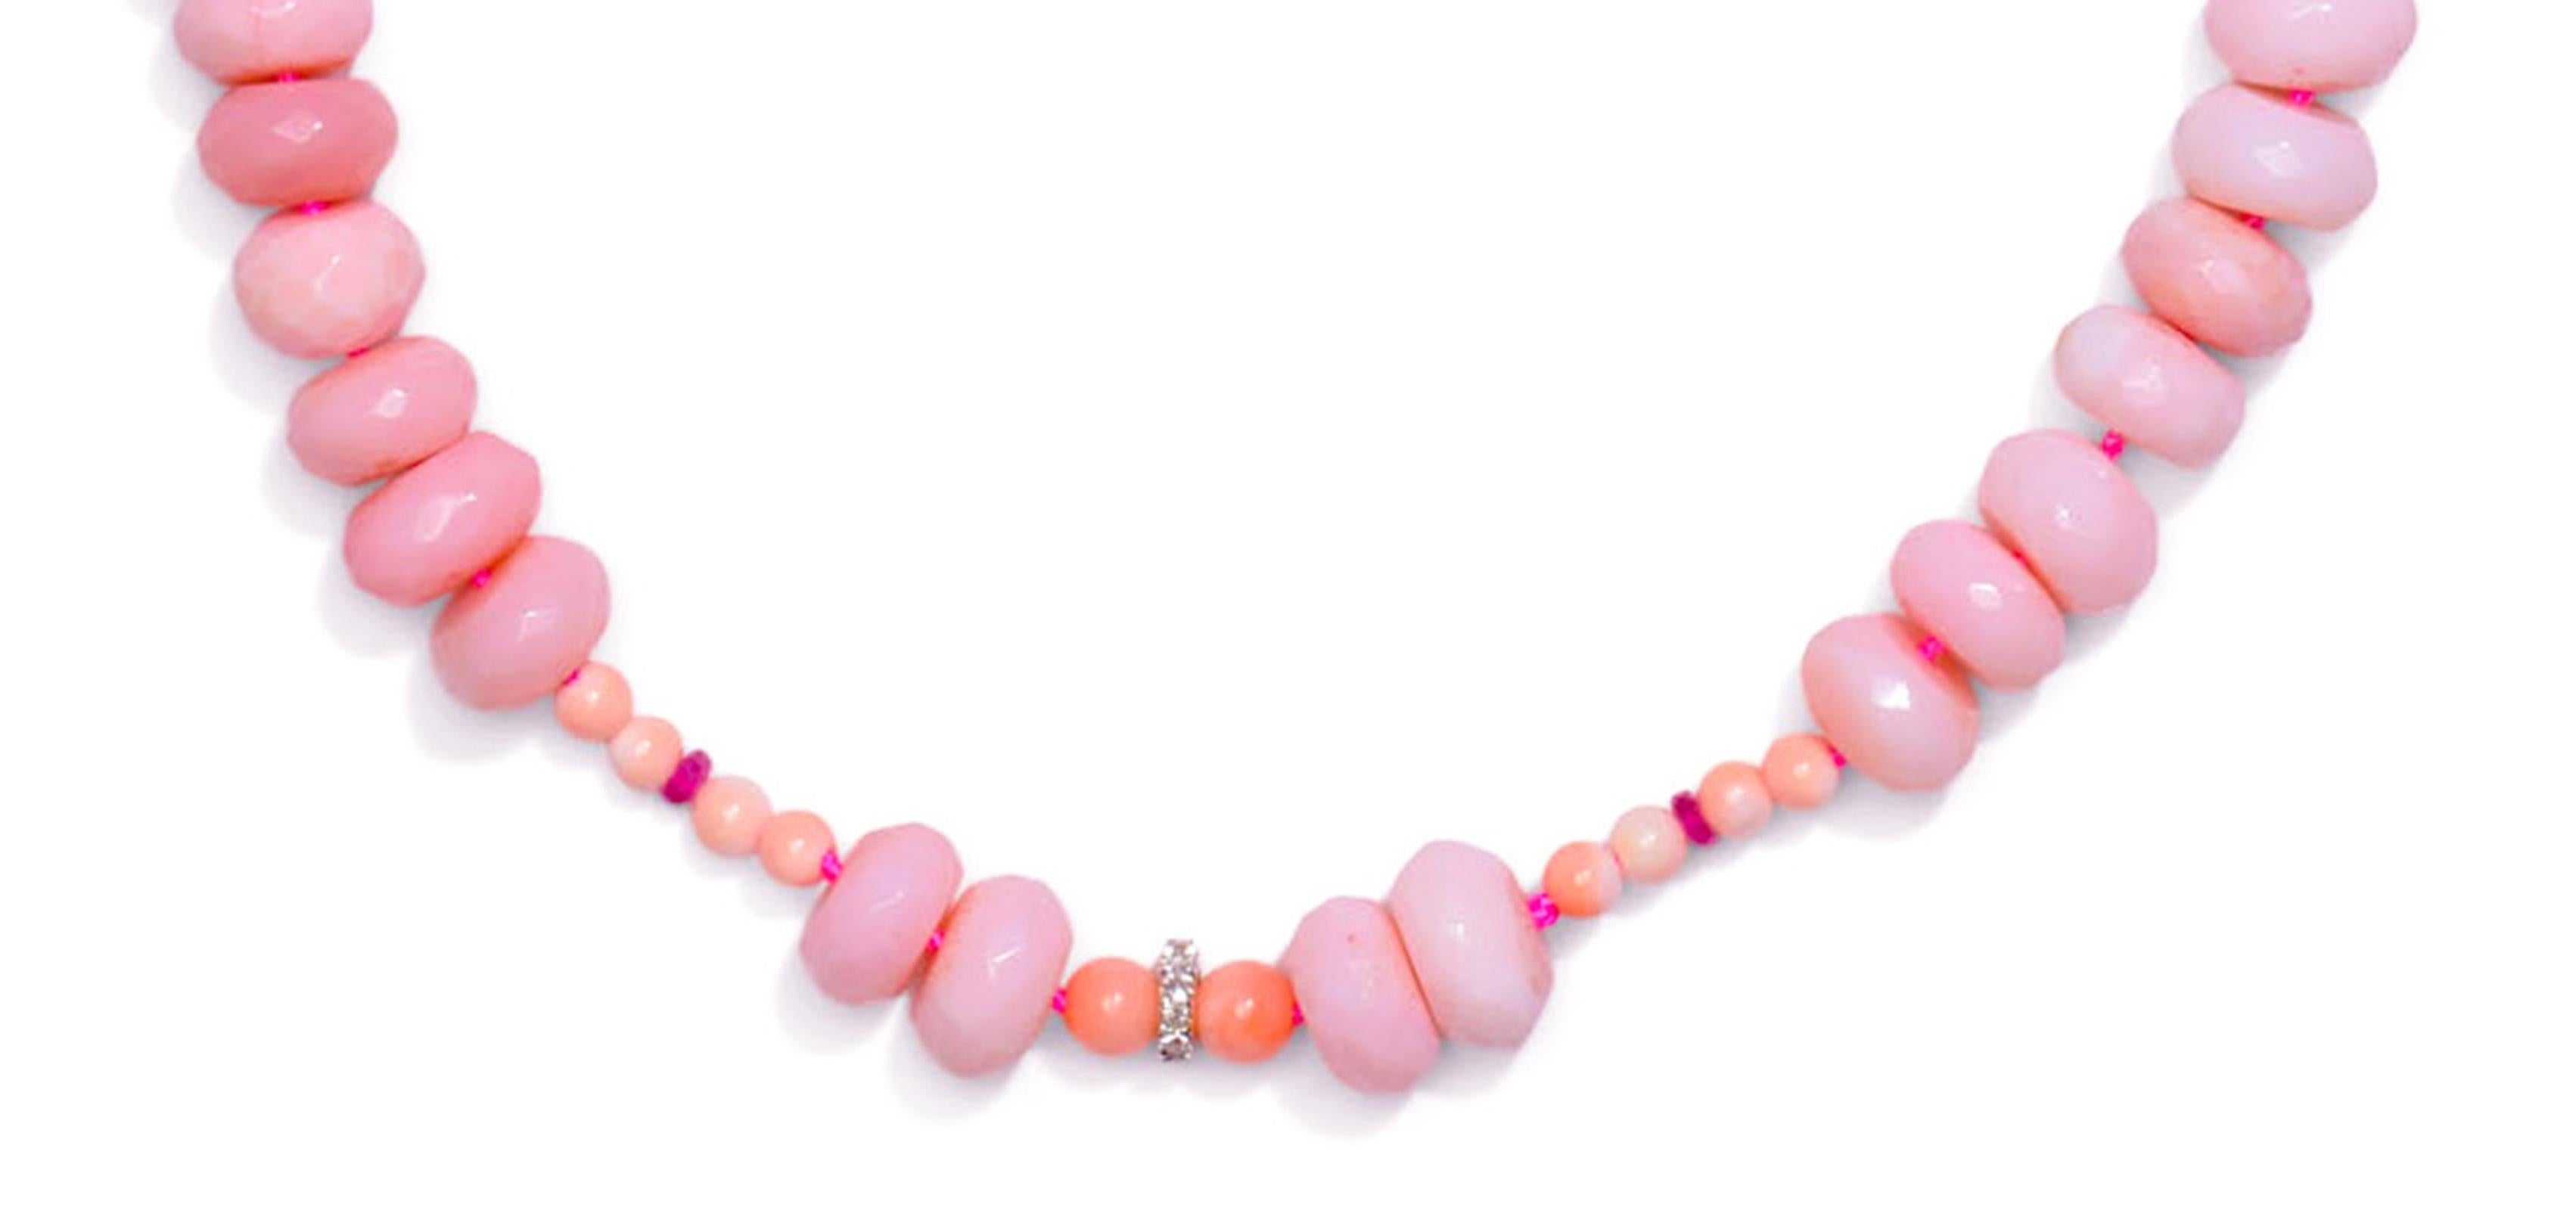 Pink Peruvian Opal Necklace encriched with diamonds, pink sapphires and angel skin corals. Methiciously hand knotted on pink thread.

Treat yourself to a magical, ethereal look with this Pink Peruvian Opal Necklace. It's adorned with pink coral,